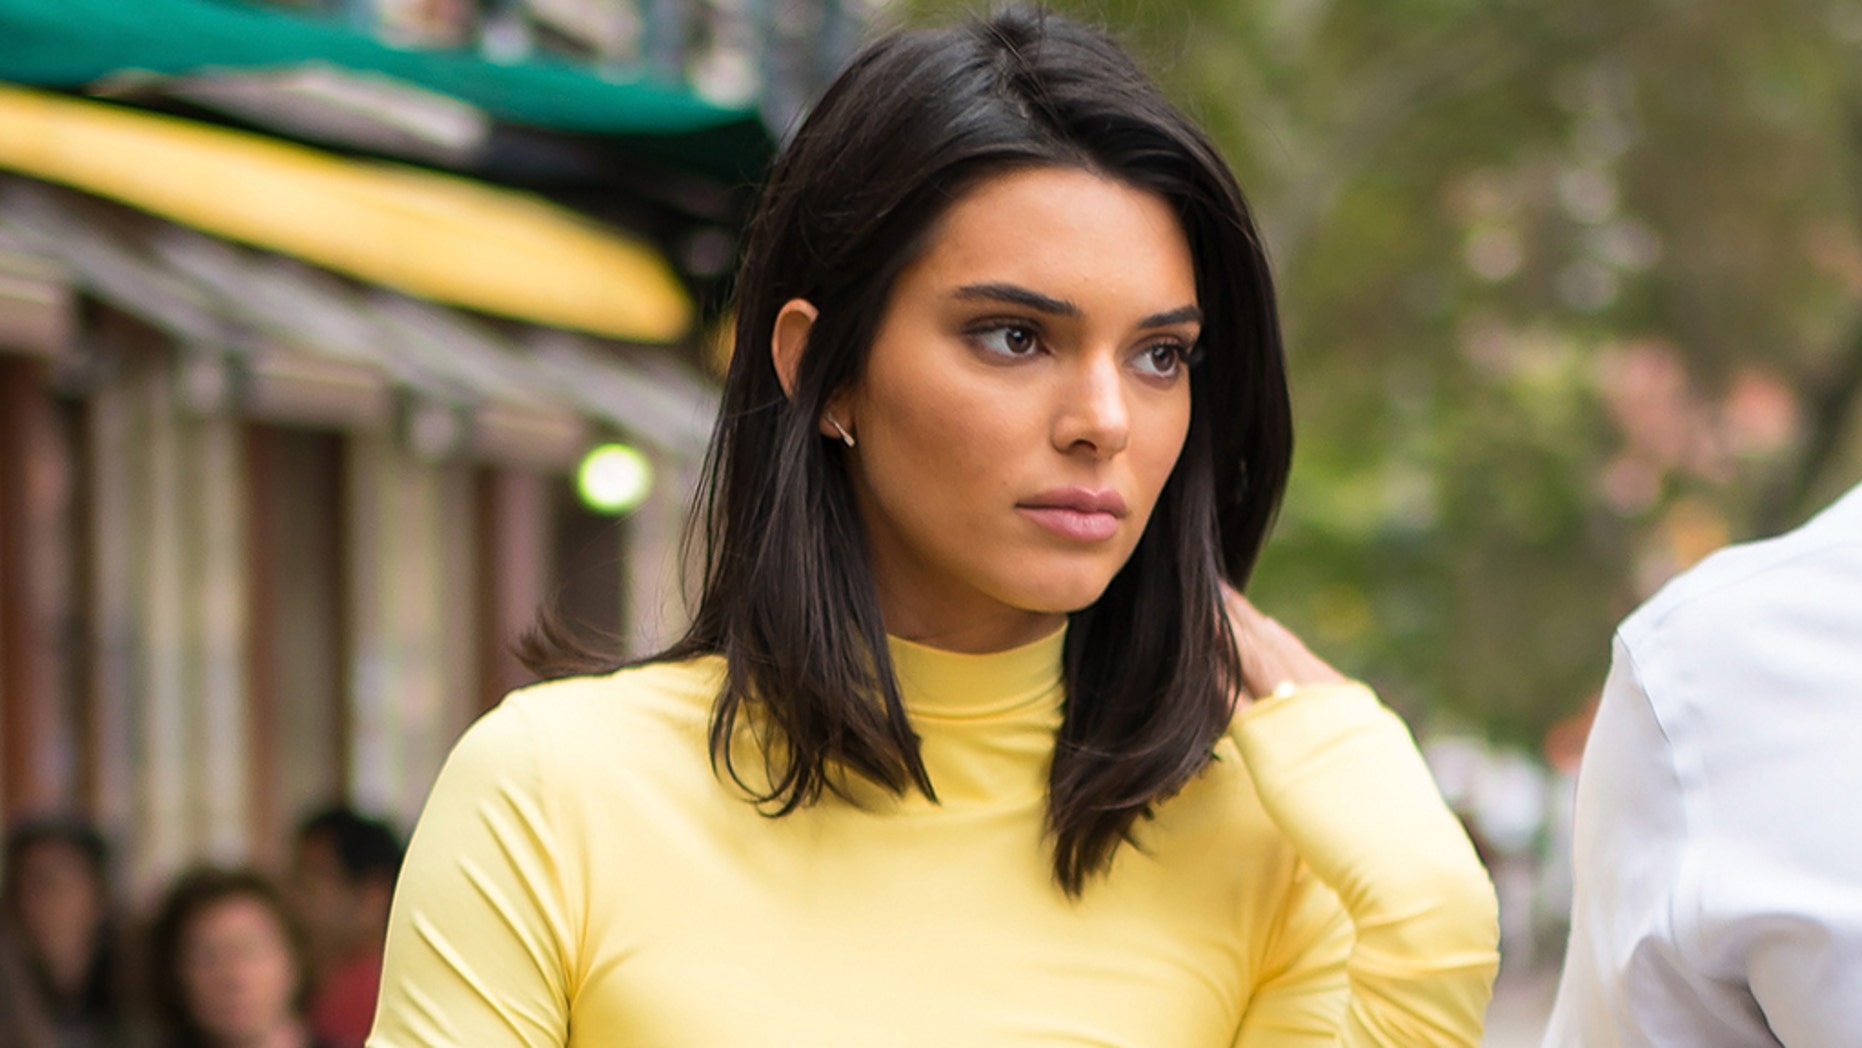 Kendall Jenner set to reveal her ‘most raw story,’ mom Kris says